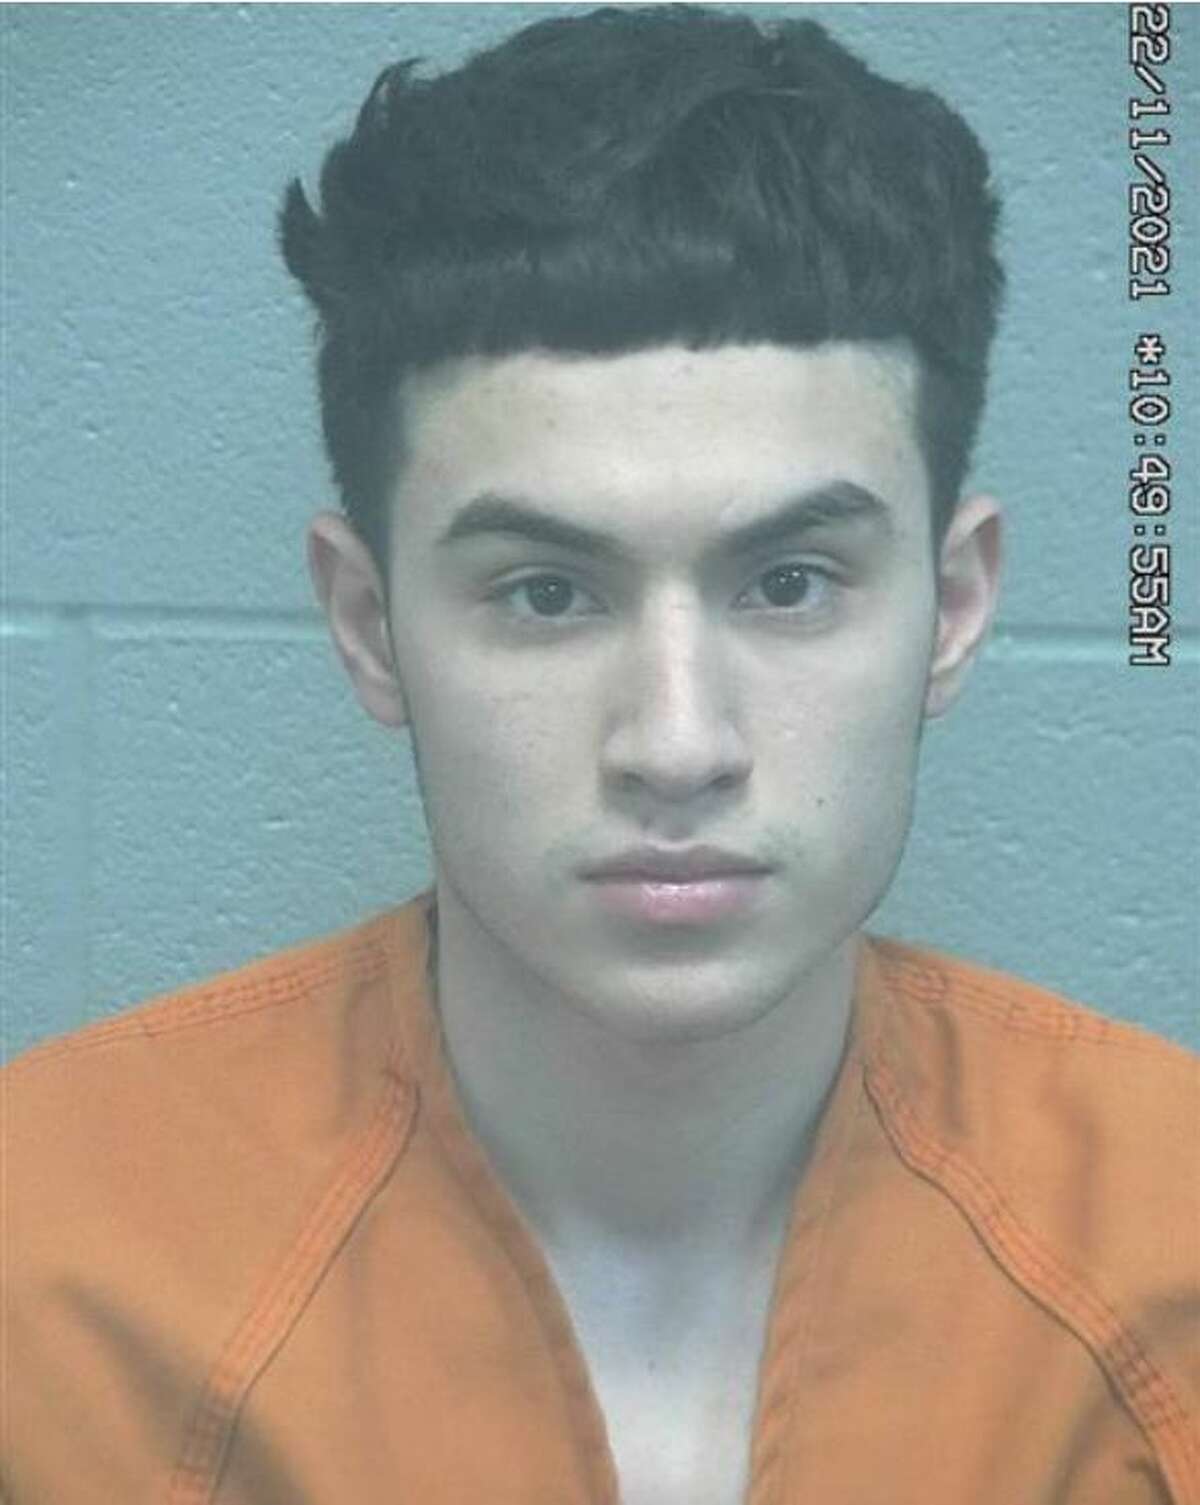 Triston Jovan Nunez, 20, was arrested on three counts of theft of a firearm and one count of theft over $100 under $750.